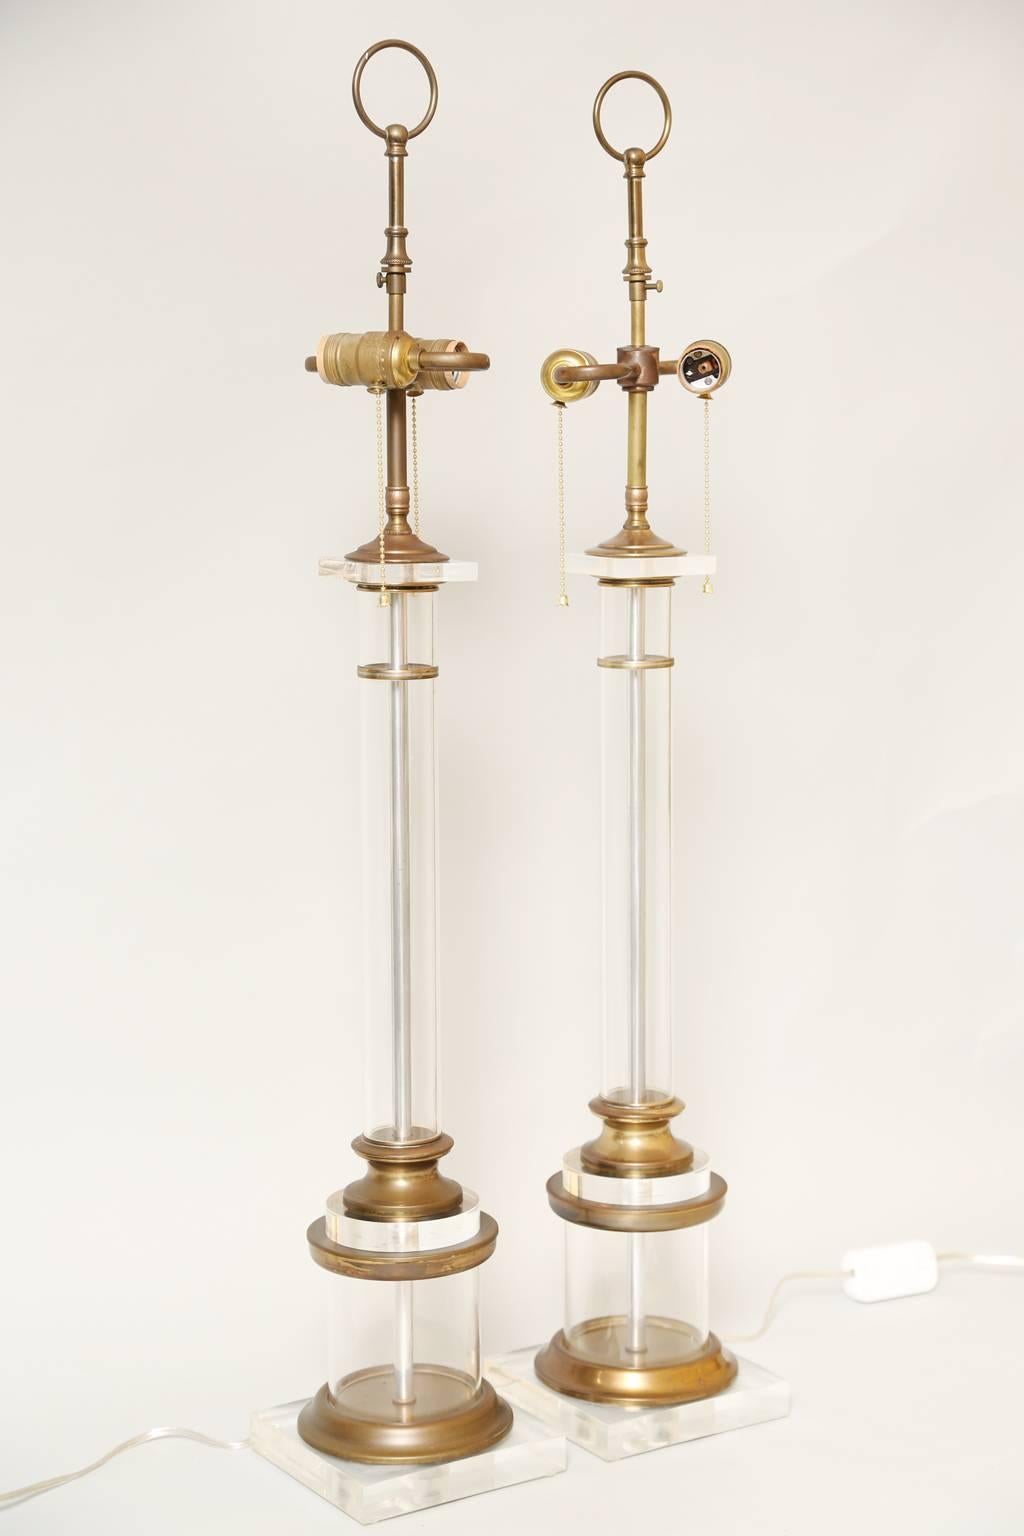 Pair of table lamps, each a round column of clear acrylic Lucite, with collars and fittings of brass, raised on square plinth base. 

Stock ID: D1256.